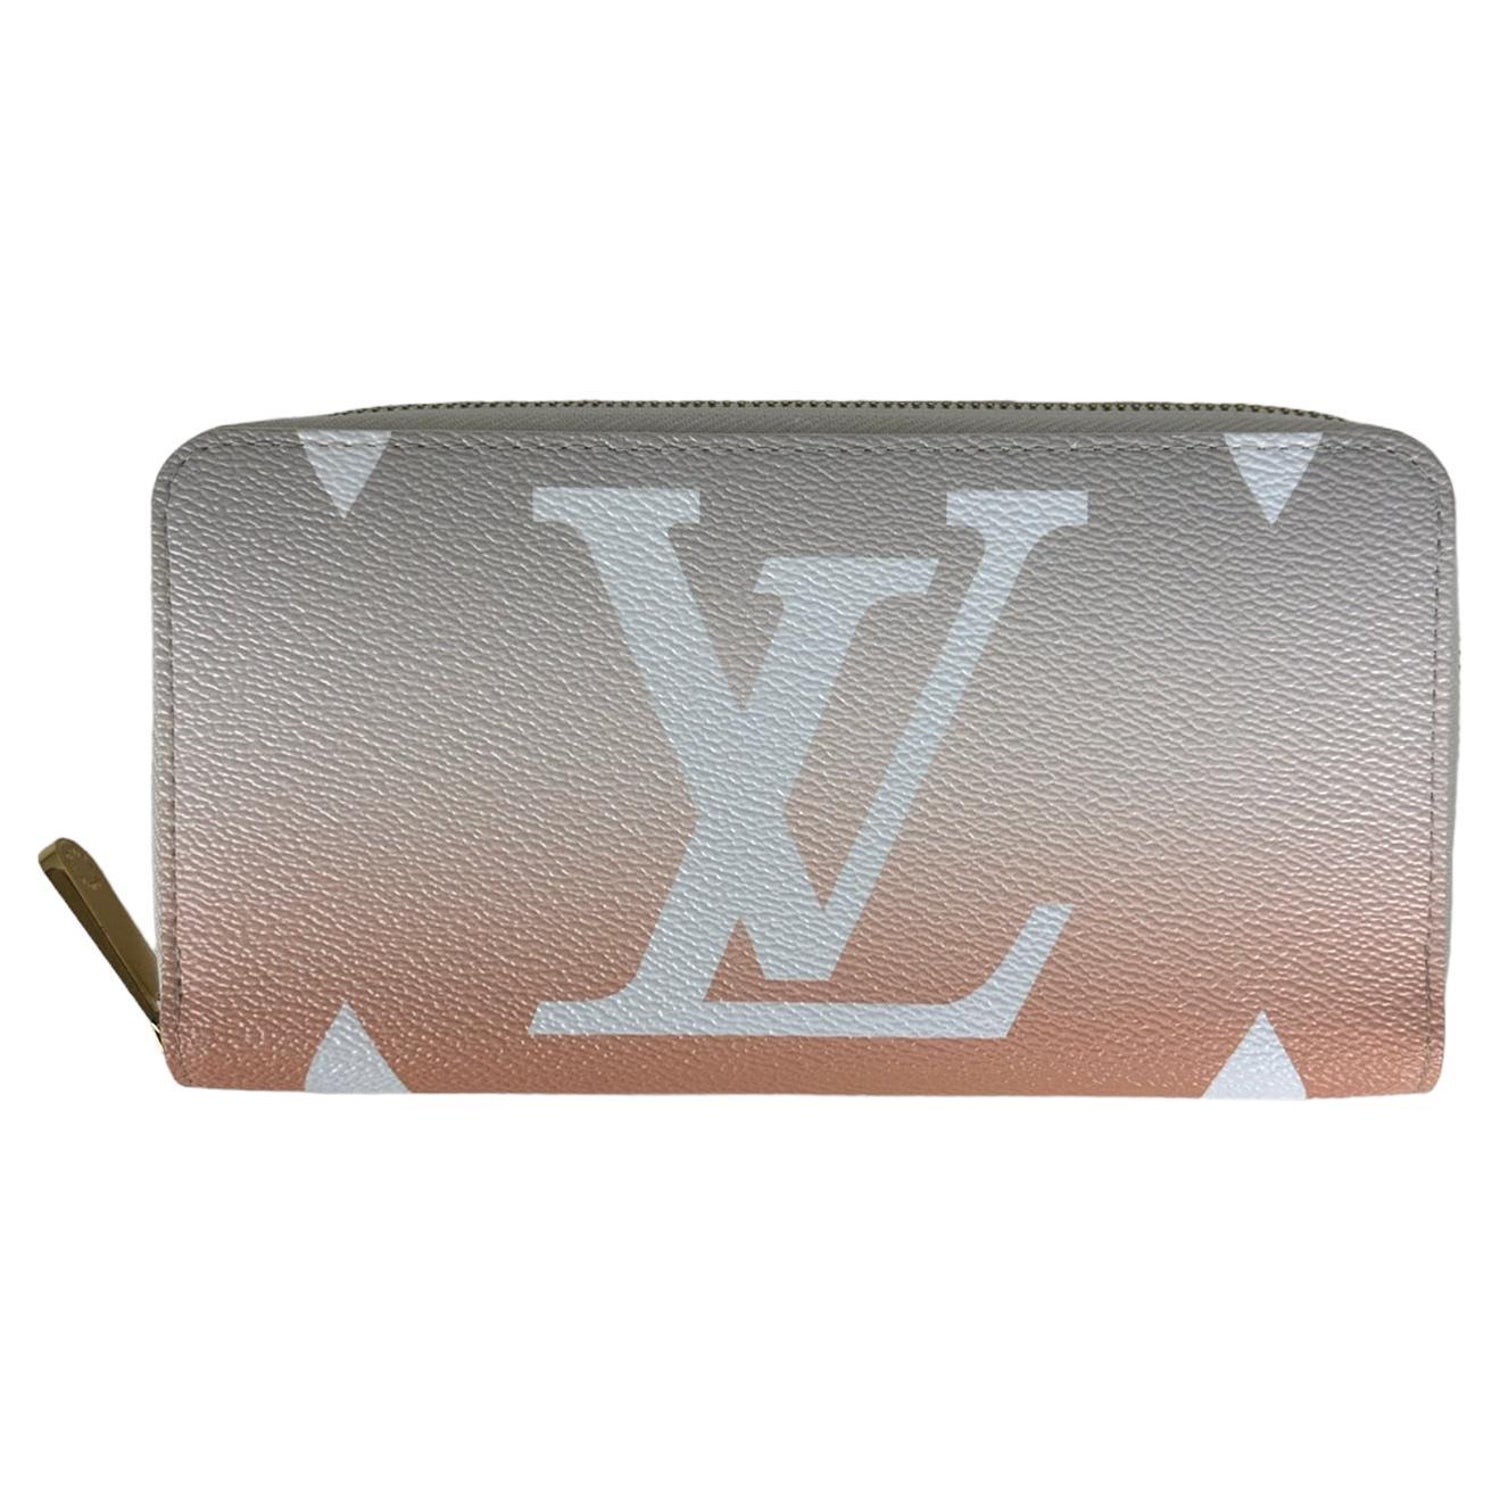 Louis Vuitton by The Pool Kirigami Pouch Brume PM Card Case